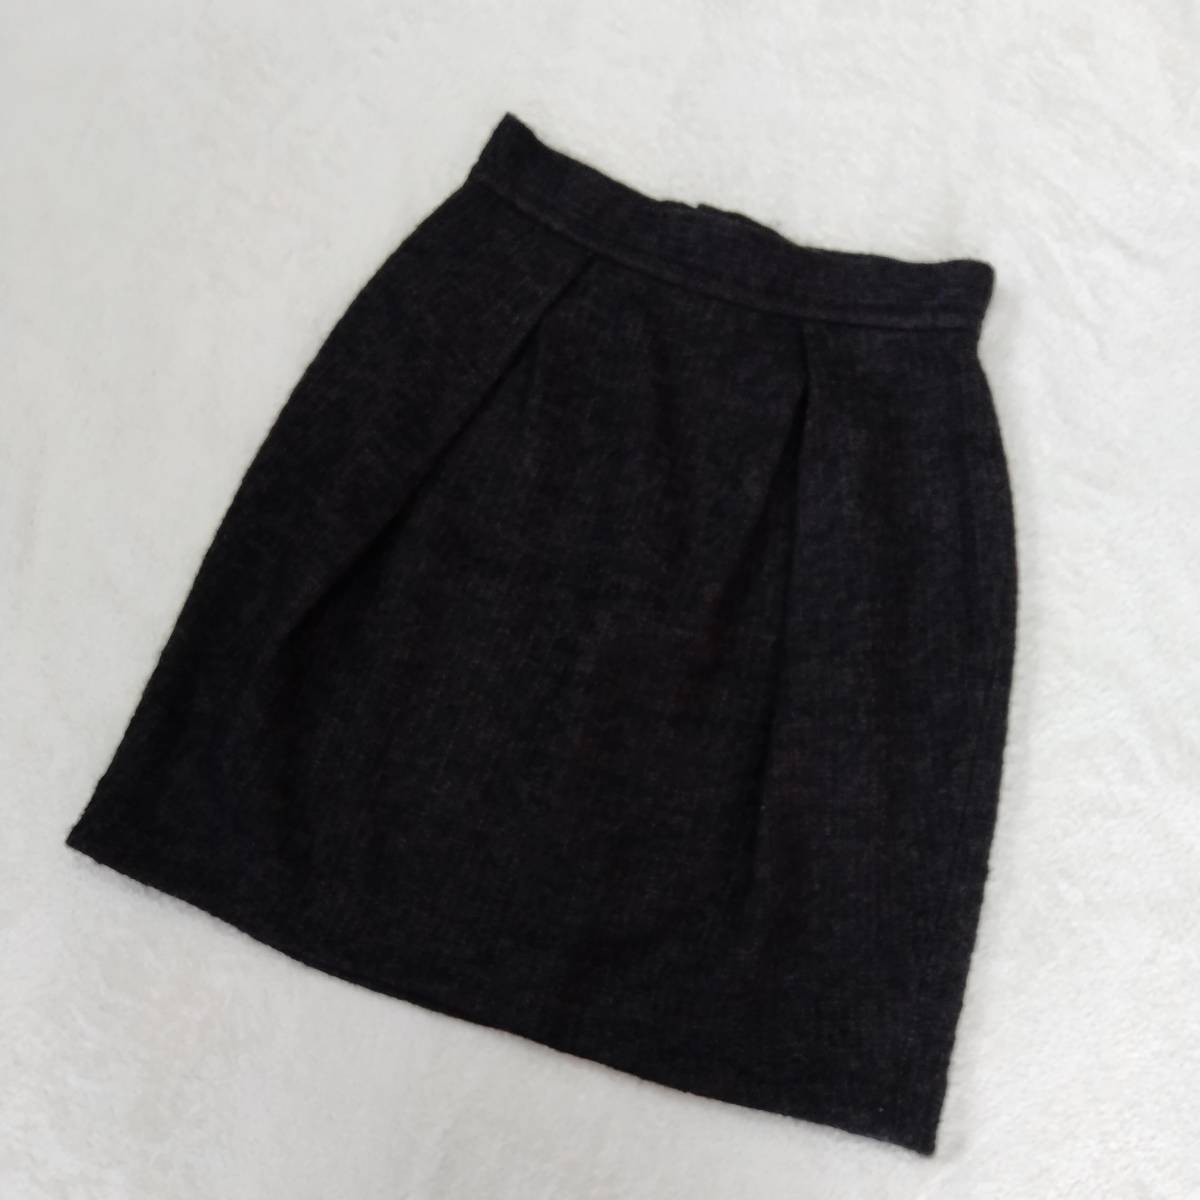 Theory luxe theory ryuks tight skirt bottoms waist tuck high waist fastener lining equipped black size 38 YFF57